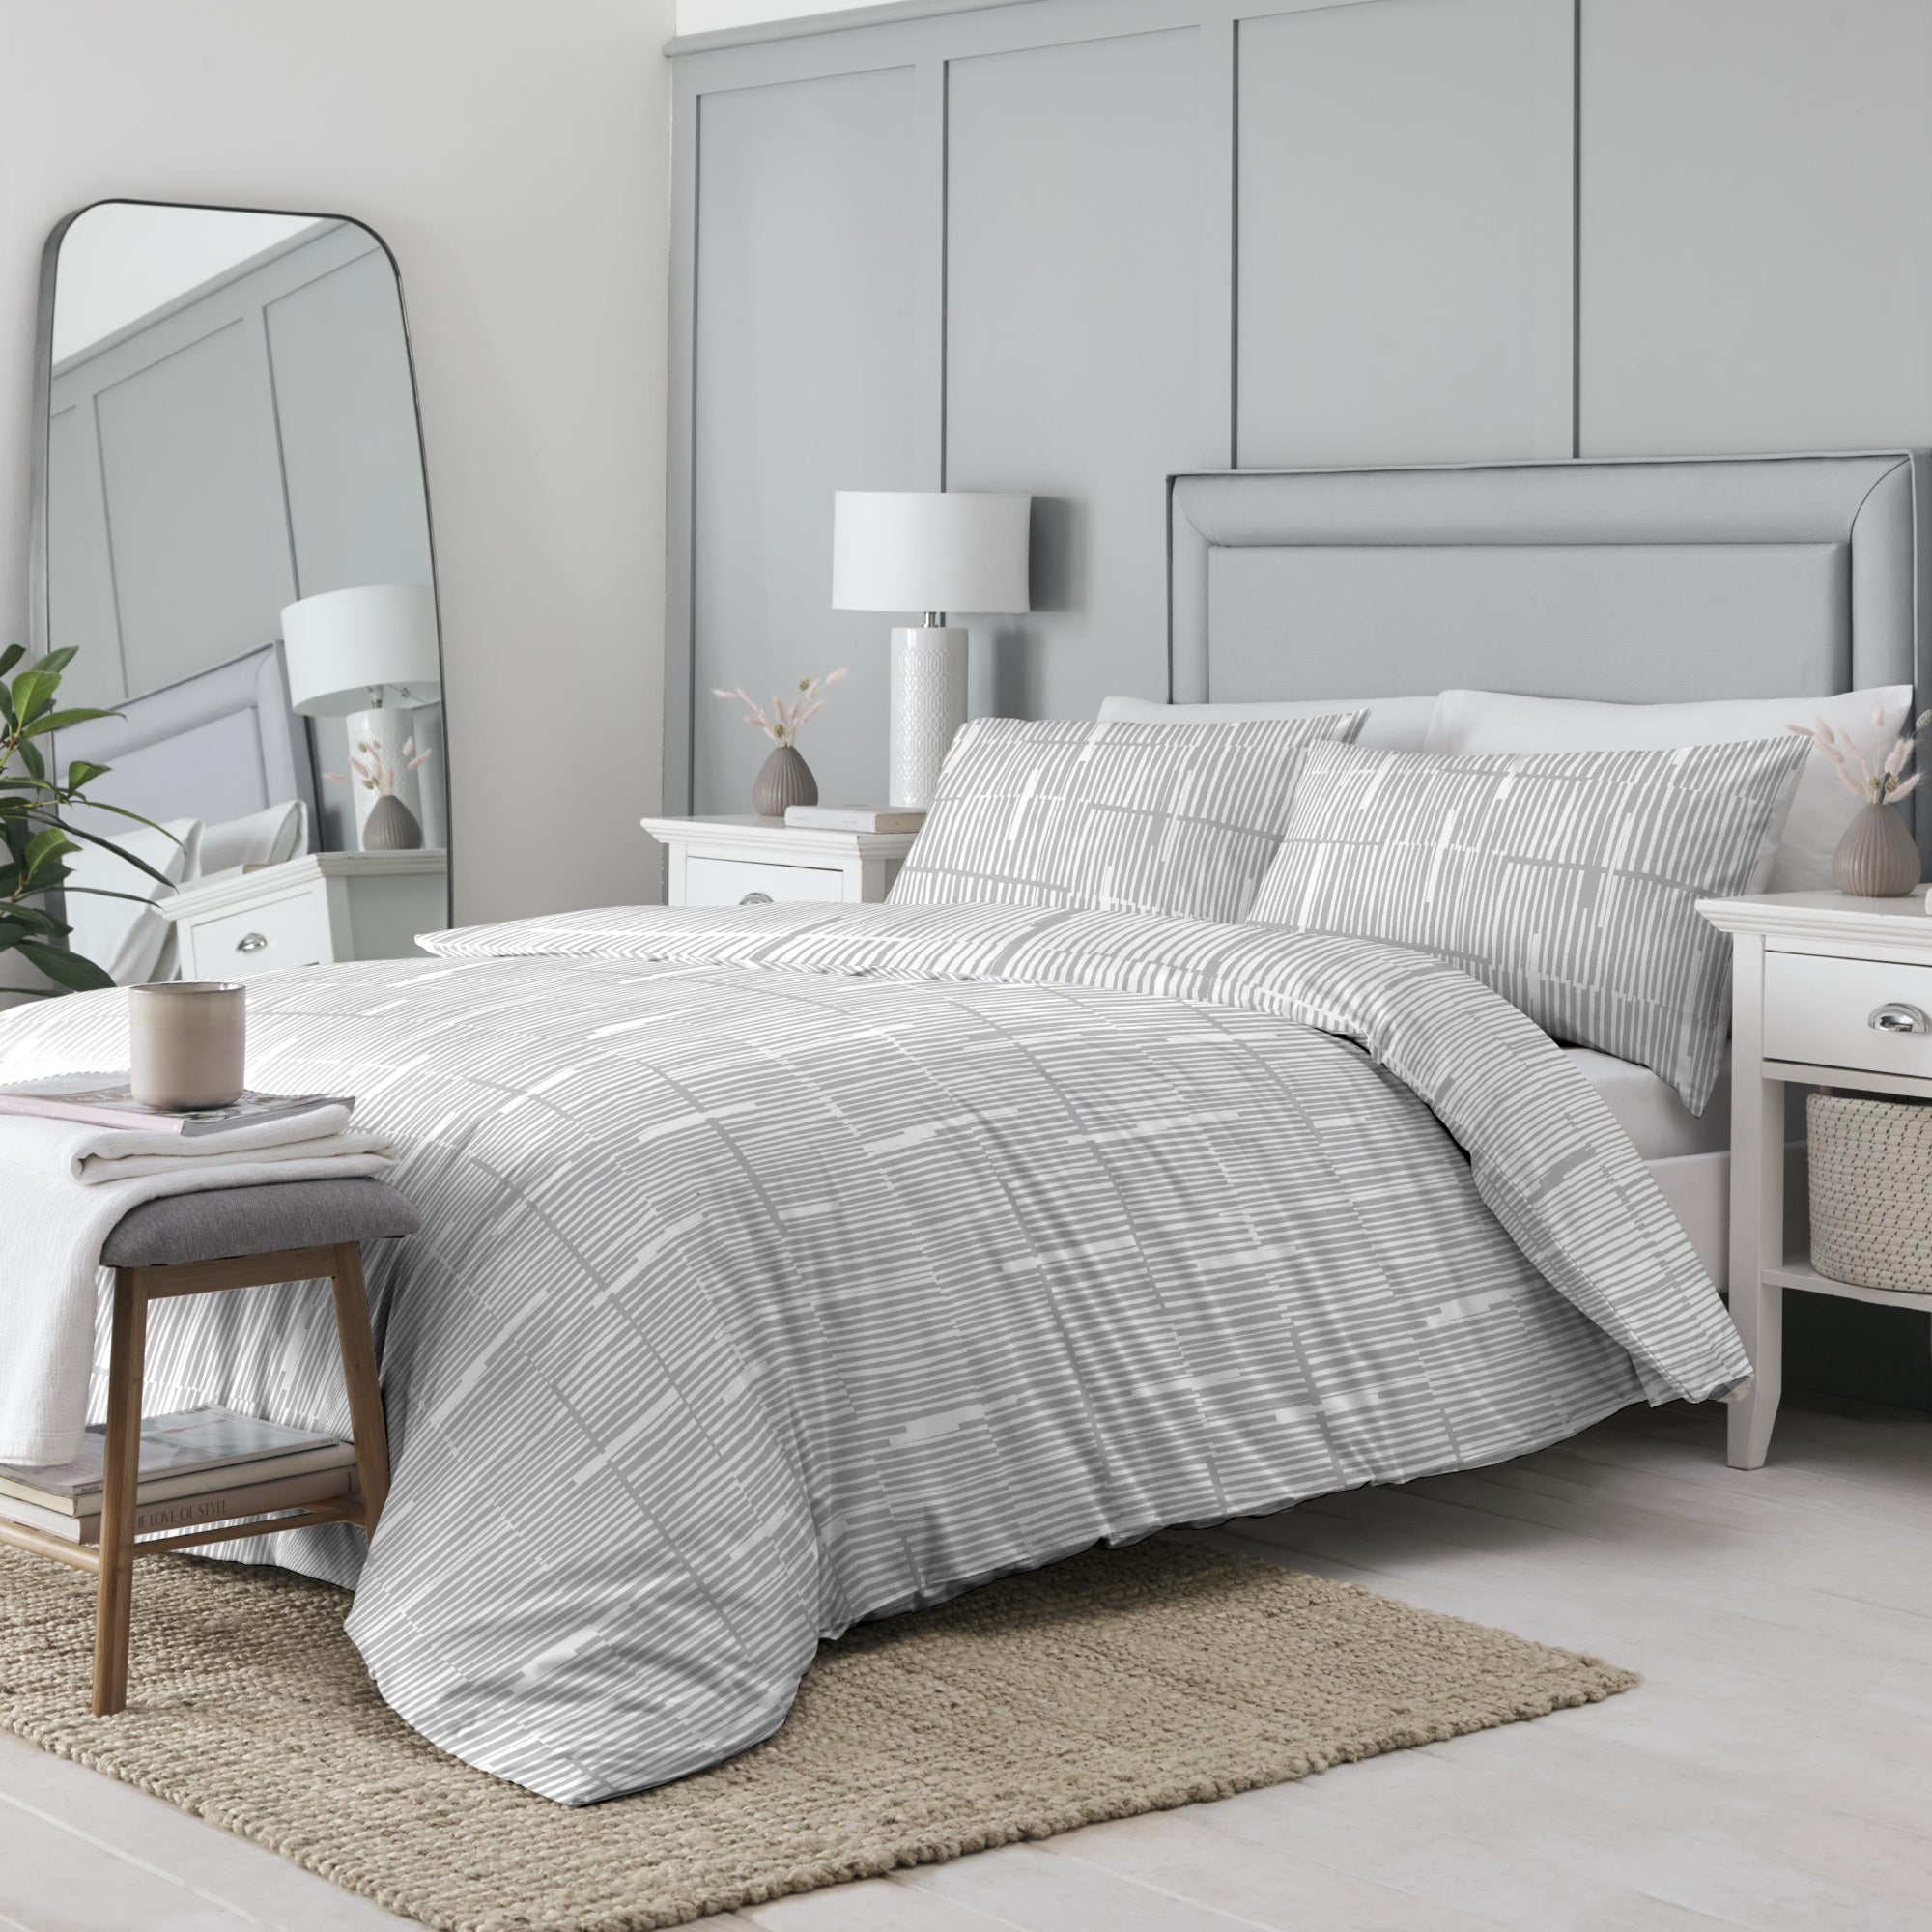 Duvet Cover Set Linear by Drift Home in Grey